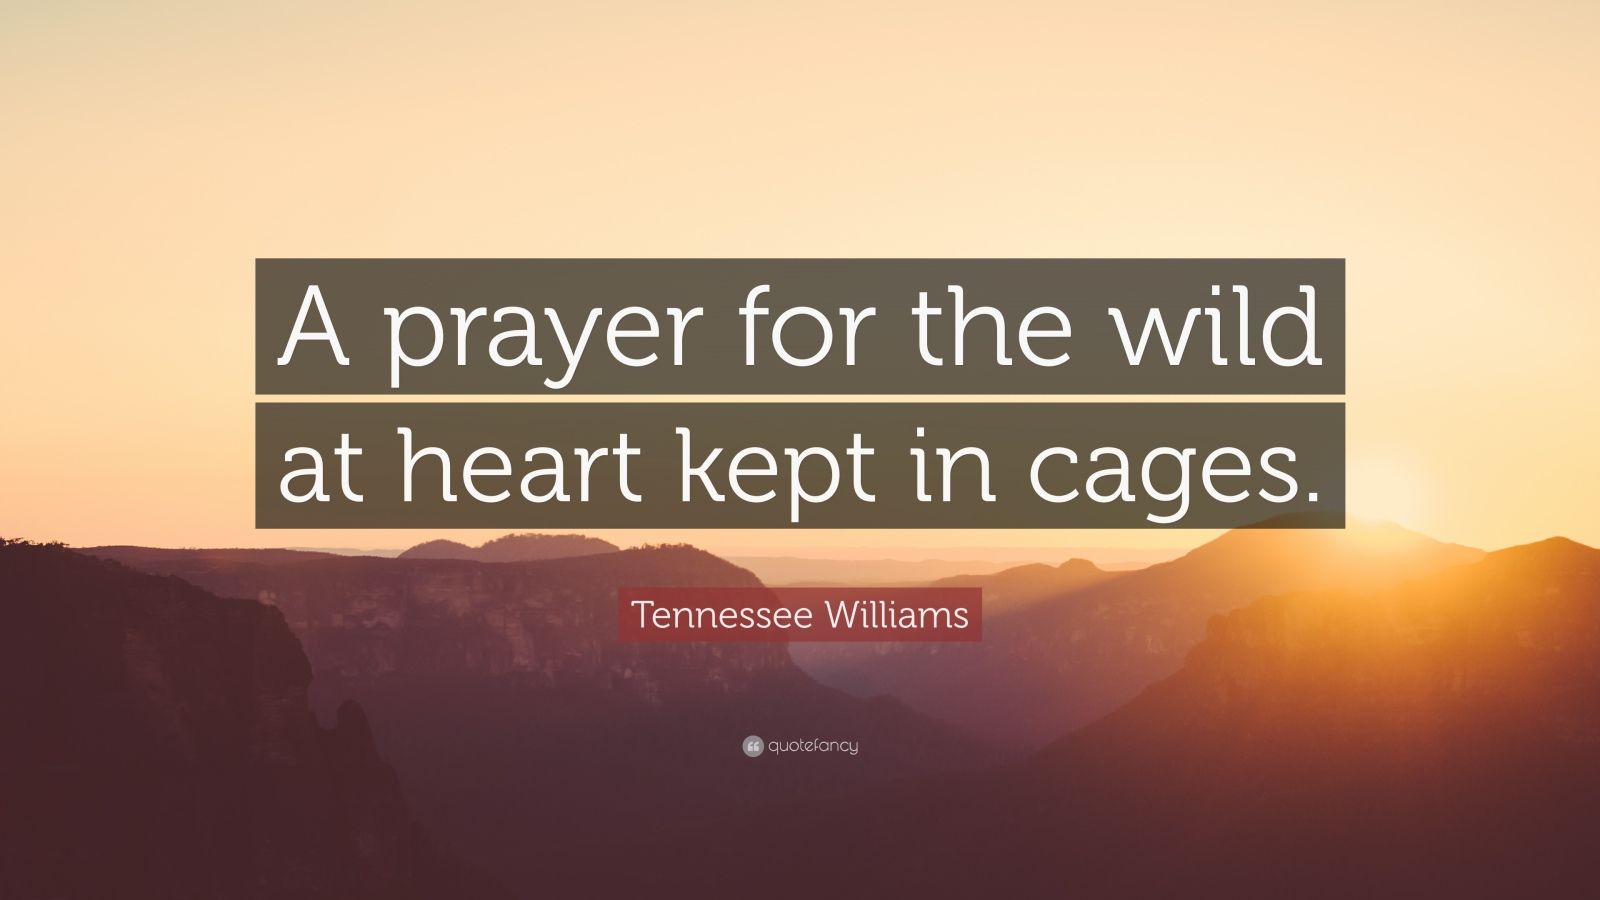 a prayer for the wild at heart kept in cages a prayer for the wild at heart kept in cages quote